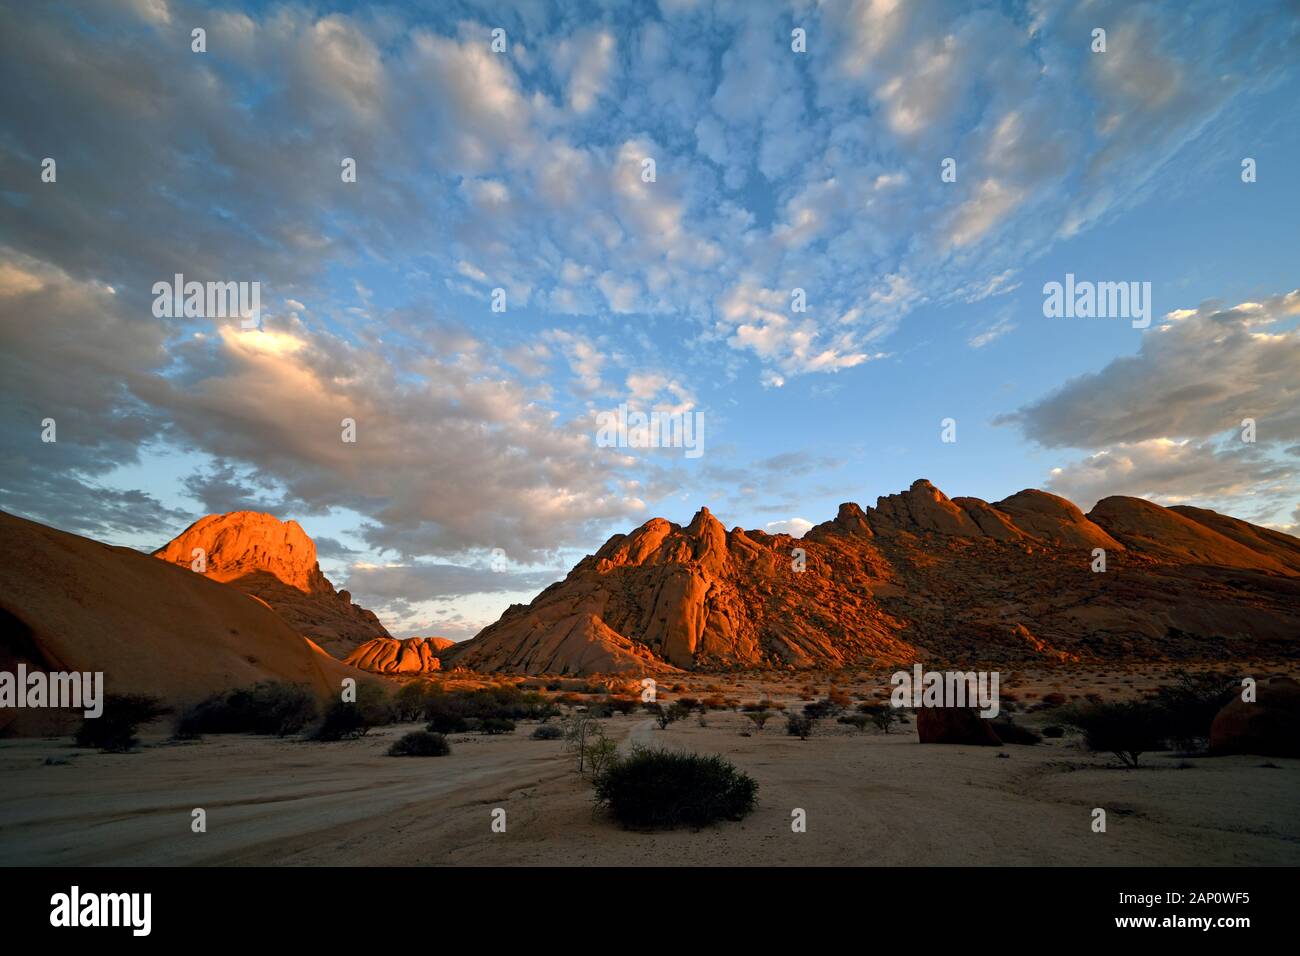 Morning light mood shortly after sunrise in the Spitzkoppeggebiet, taken on 03.03.2019. The Spitzkoppe region and the surrounding side peaks with their rock formations belong to one of the landmarks of Namibia, it rises to a height of 1728 meters above sea level. A paradise for climbers and hikers, the area is 120 kilometers northwest of Swakopmund and is sometimes difficult to reach. The formation, which was visible from afar, was created 100 million years ago by volcanic activity, which eroded softer cover rock, so that today only the harder granite rock can be seen in its bizarre forms. Pho Stock Photo